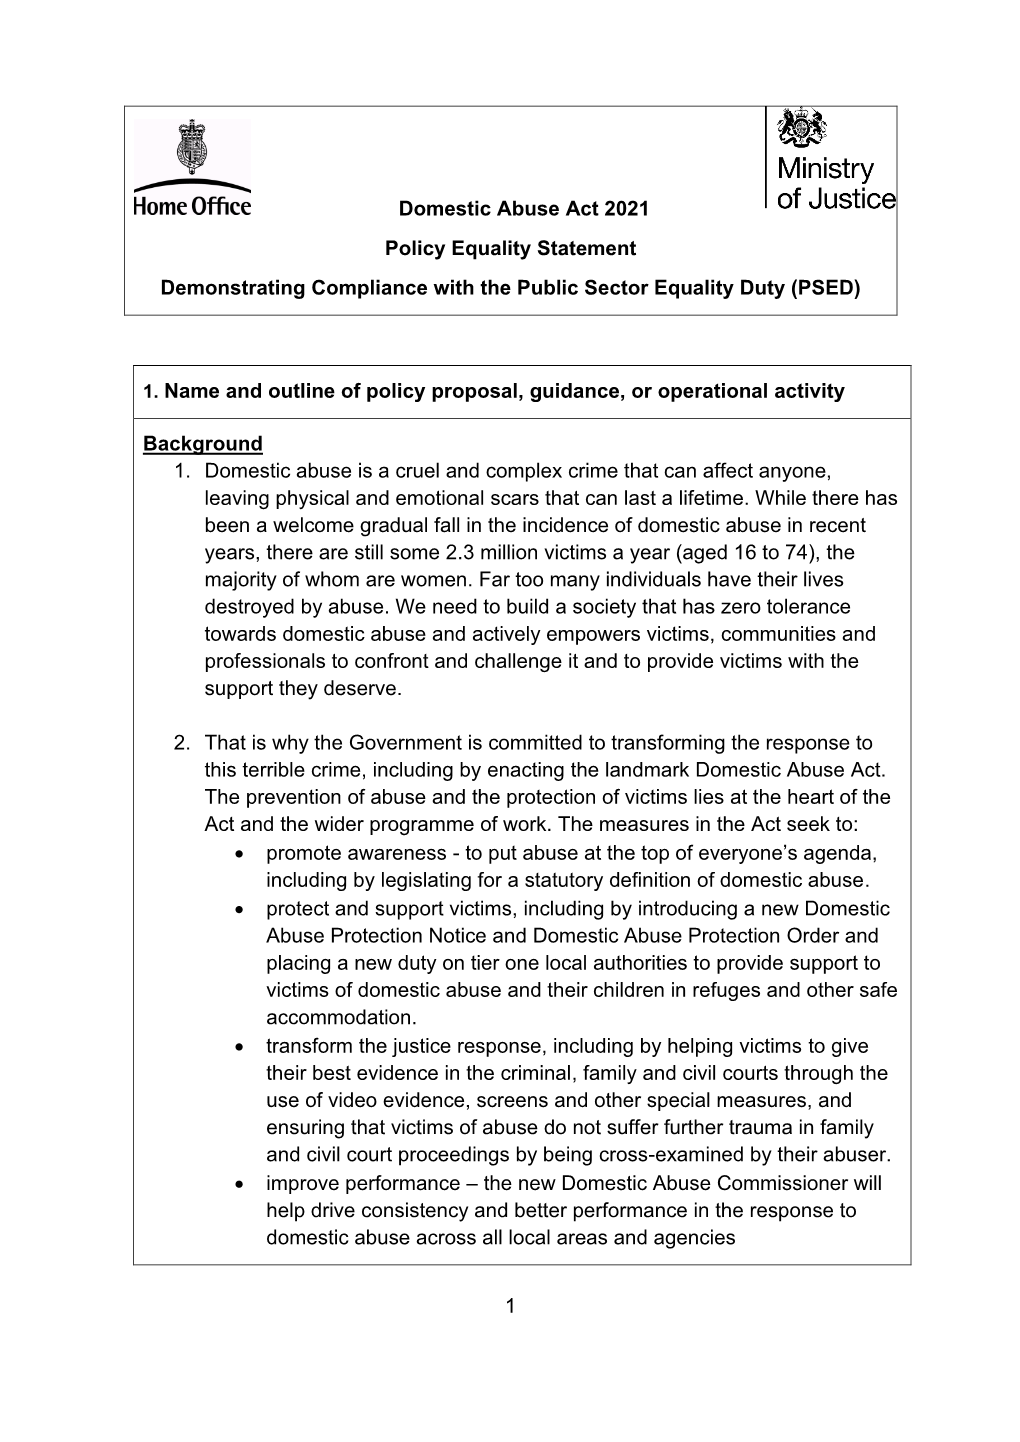 Policy Equality Statement